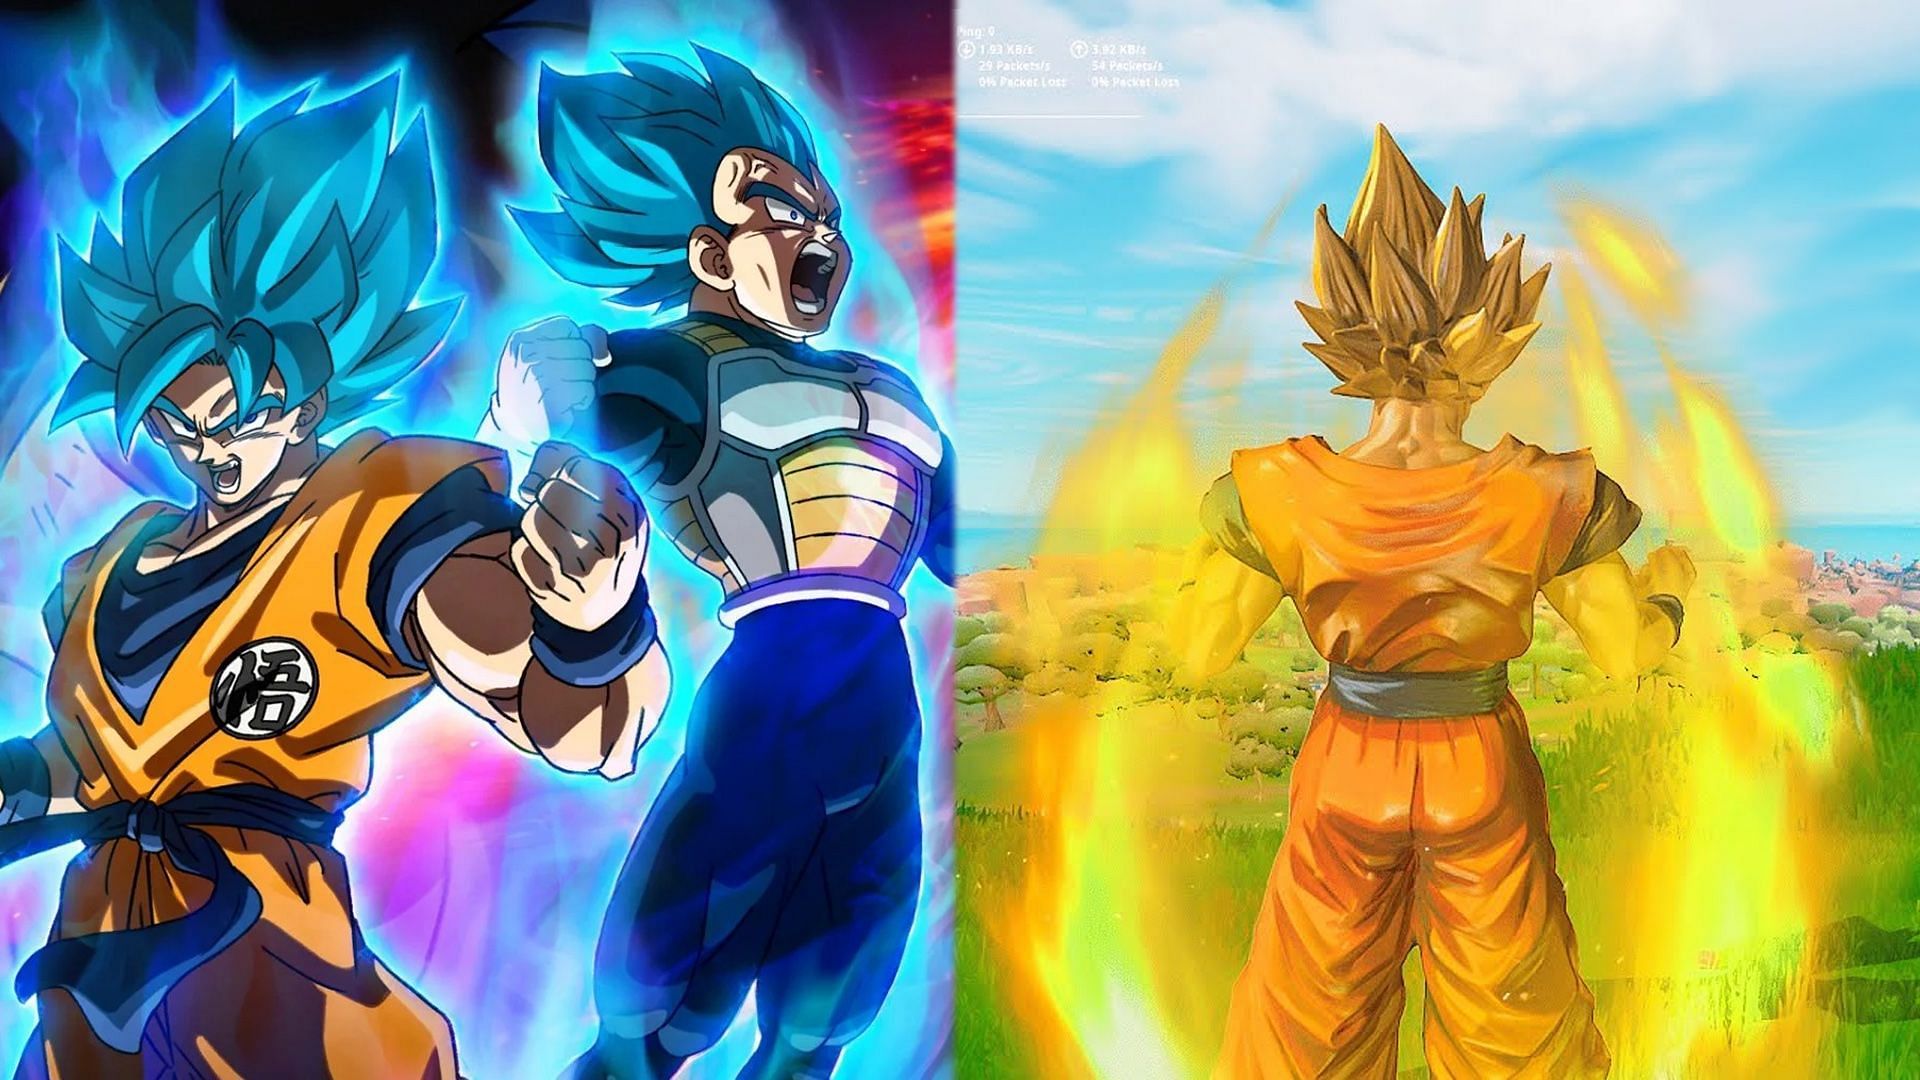 Fortnite x Dragon Ball collaboration is going to be massive, the latest leaks reveal (Image via Sportskeeda)